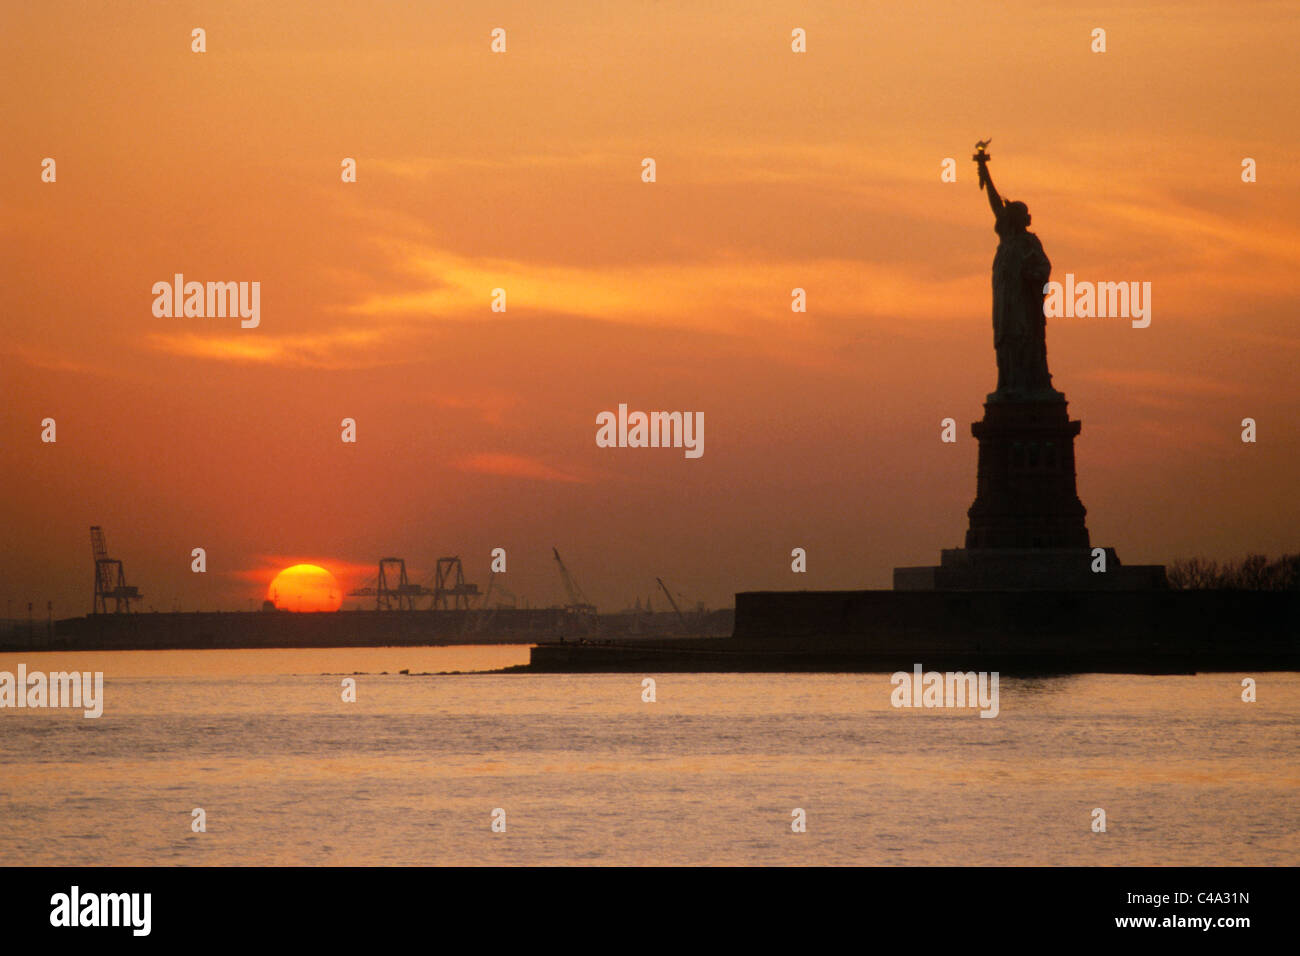 Photograph of the Statue of Liberty in New York at sunset Stock Photo